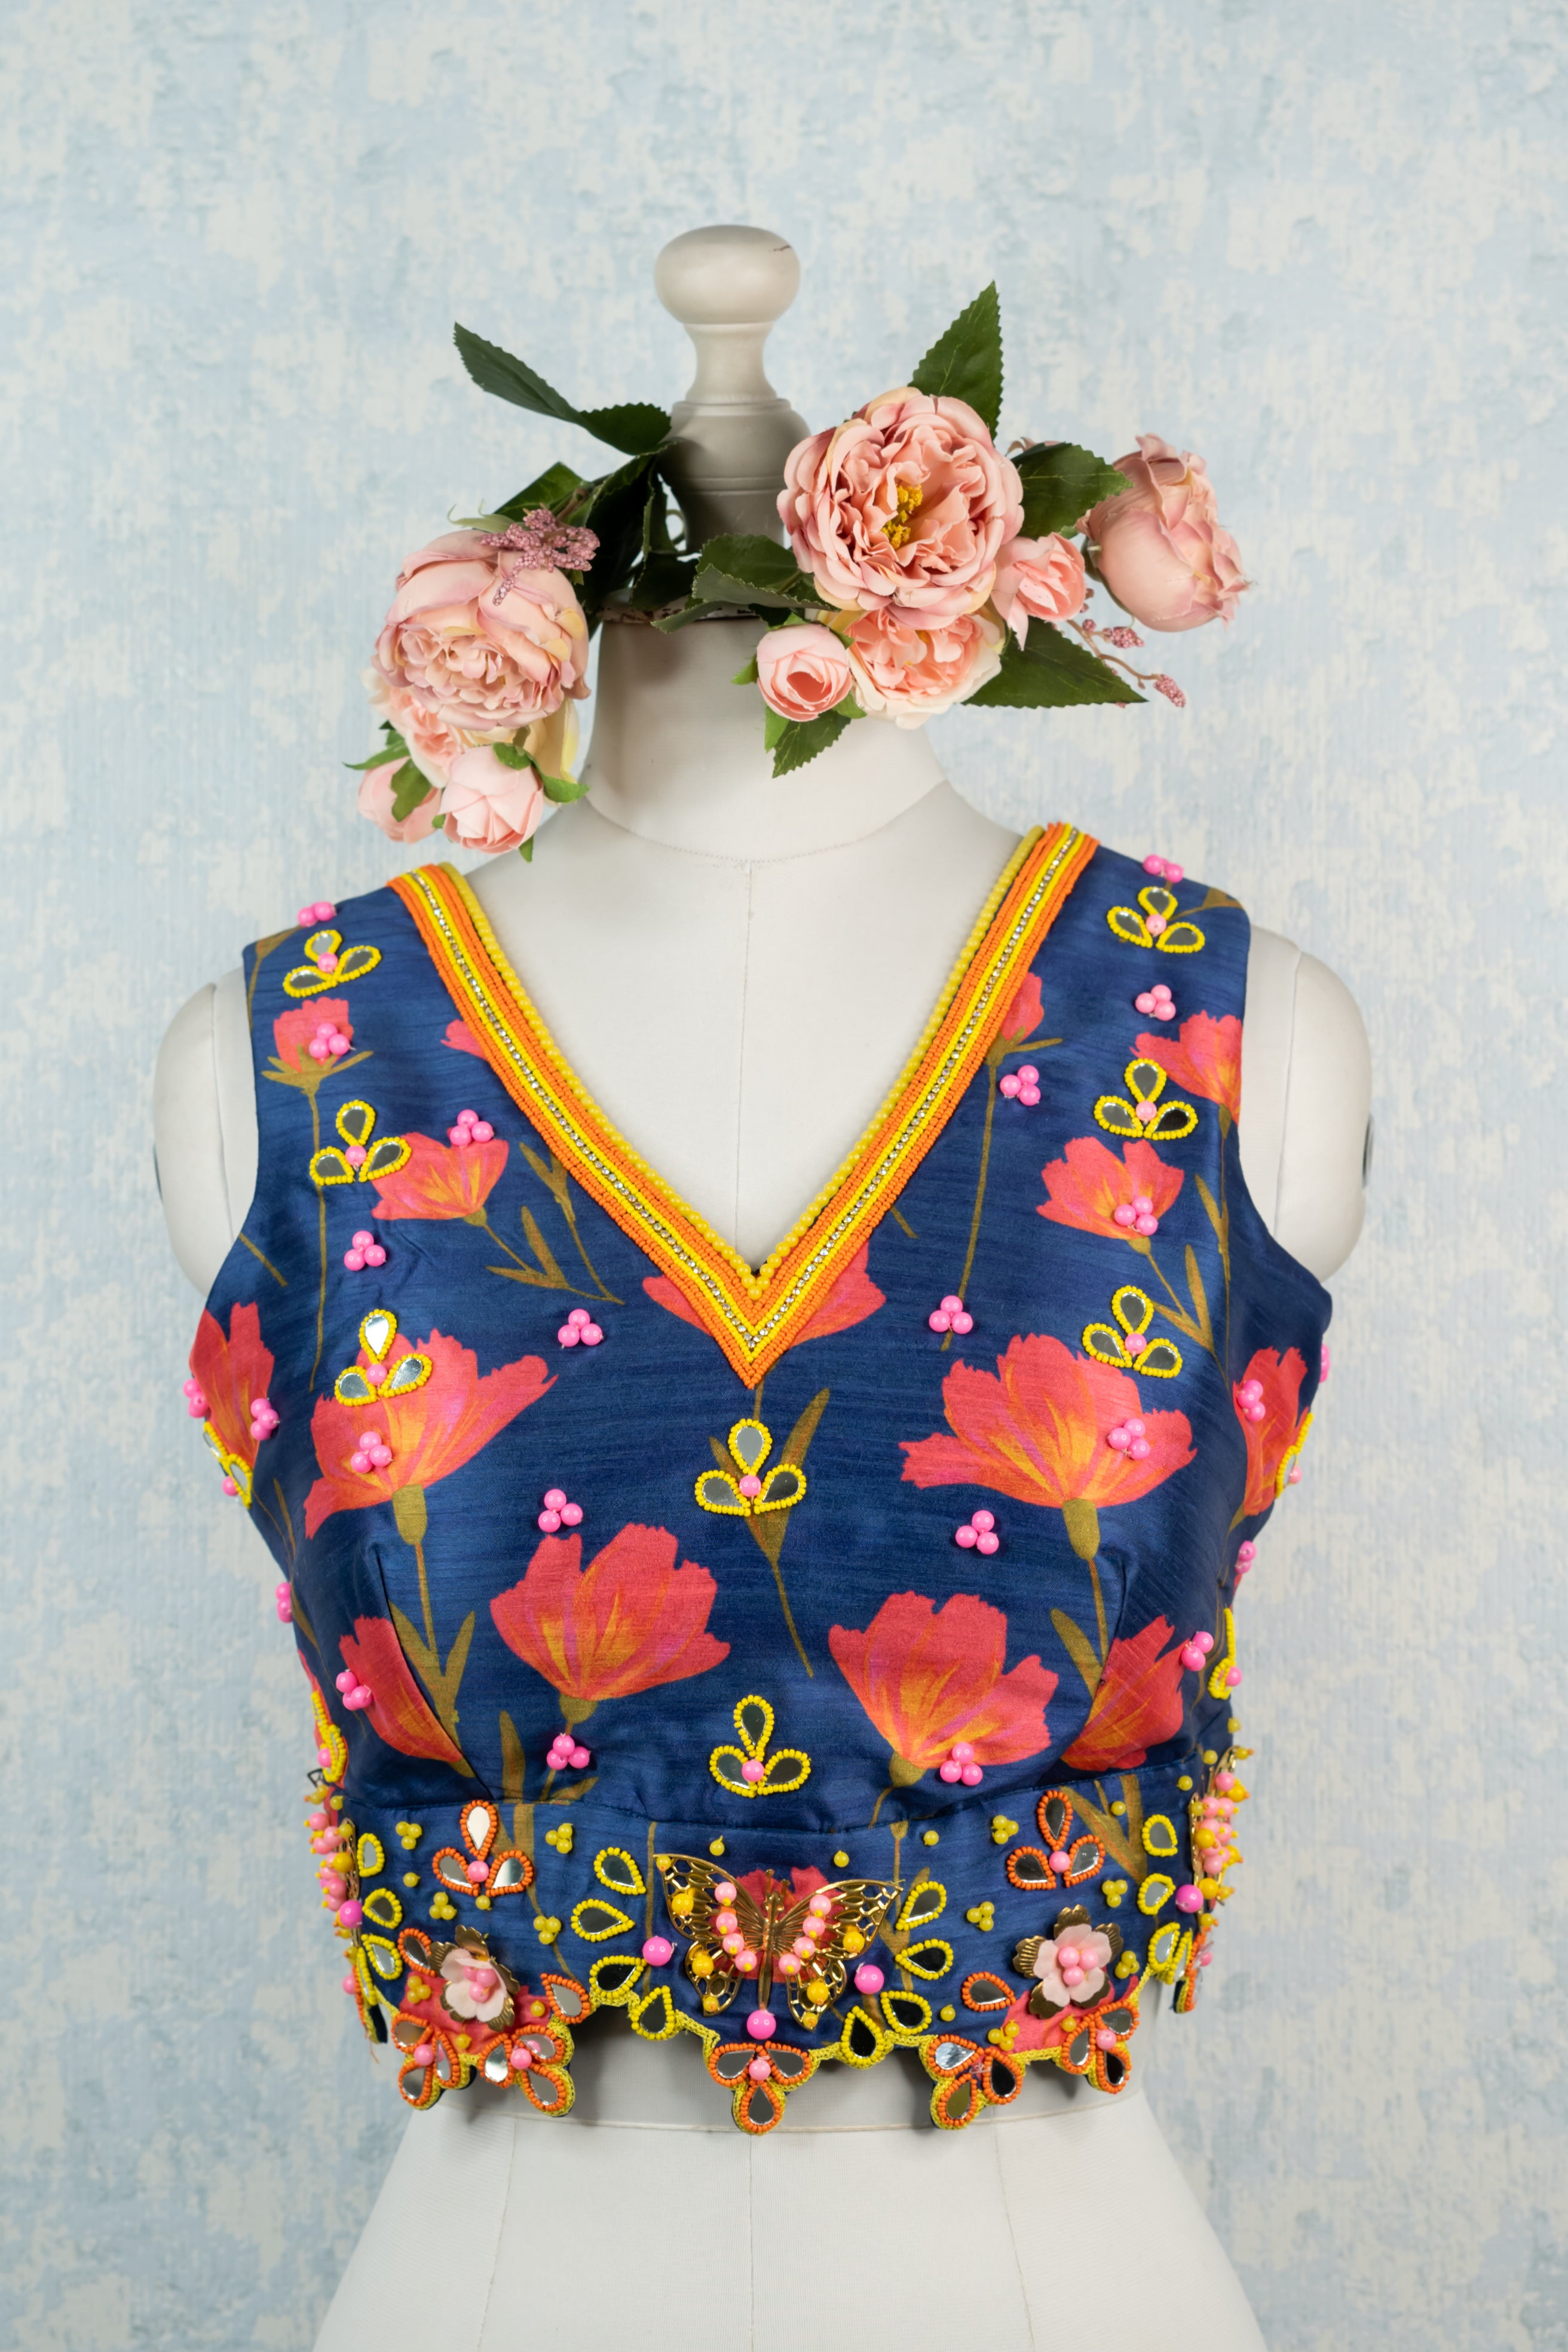 Berry blue floral printed blouse